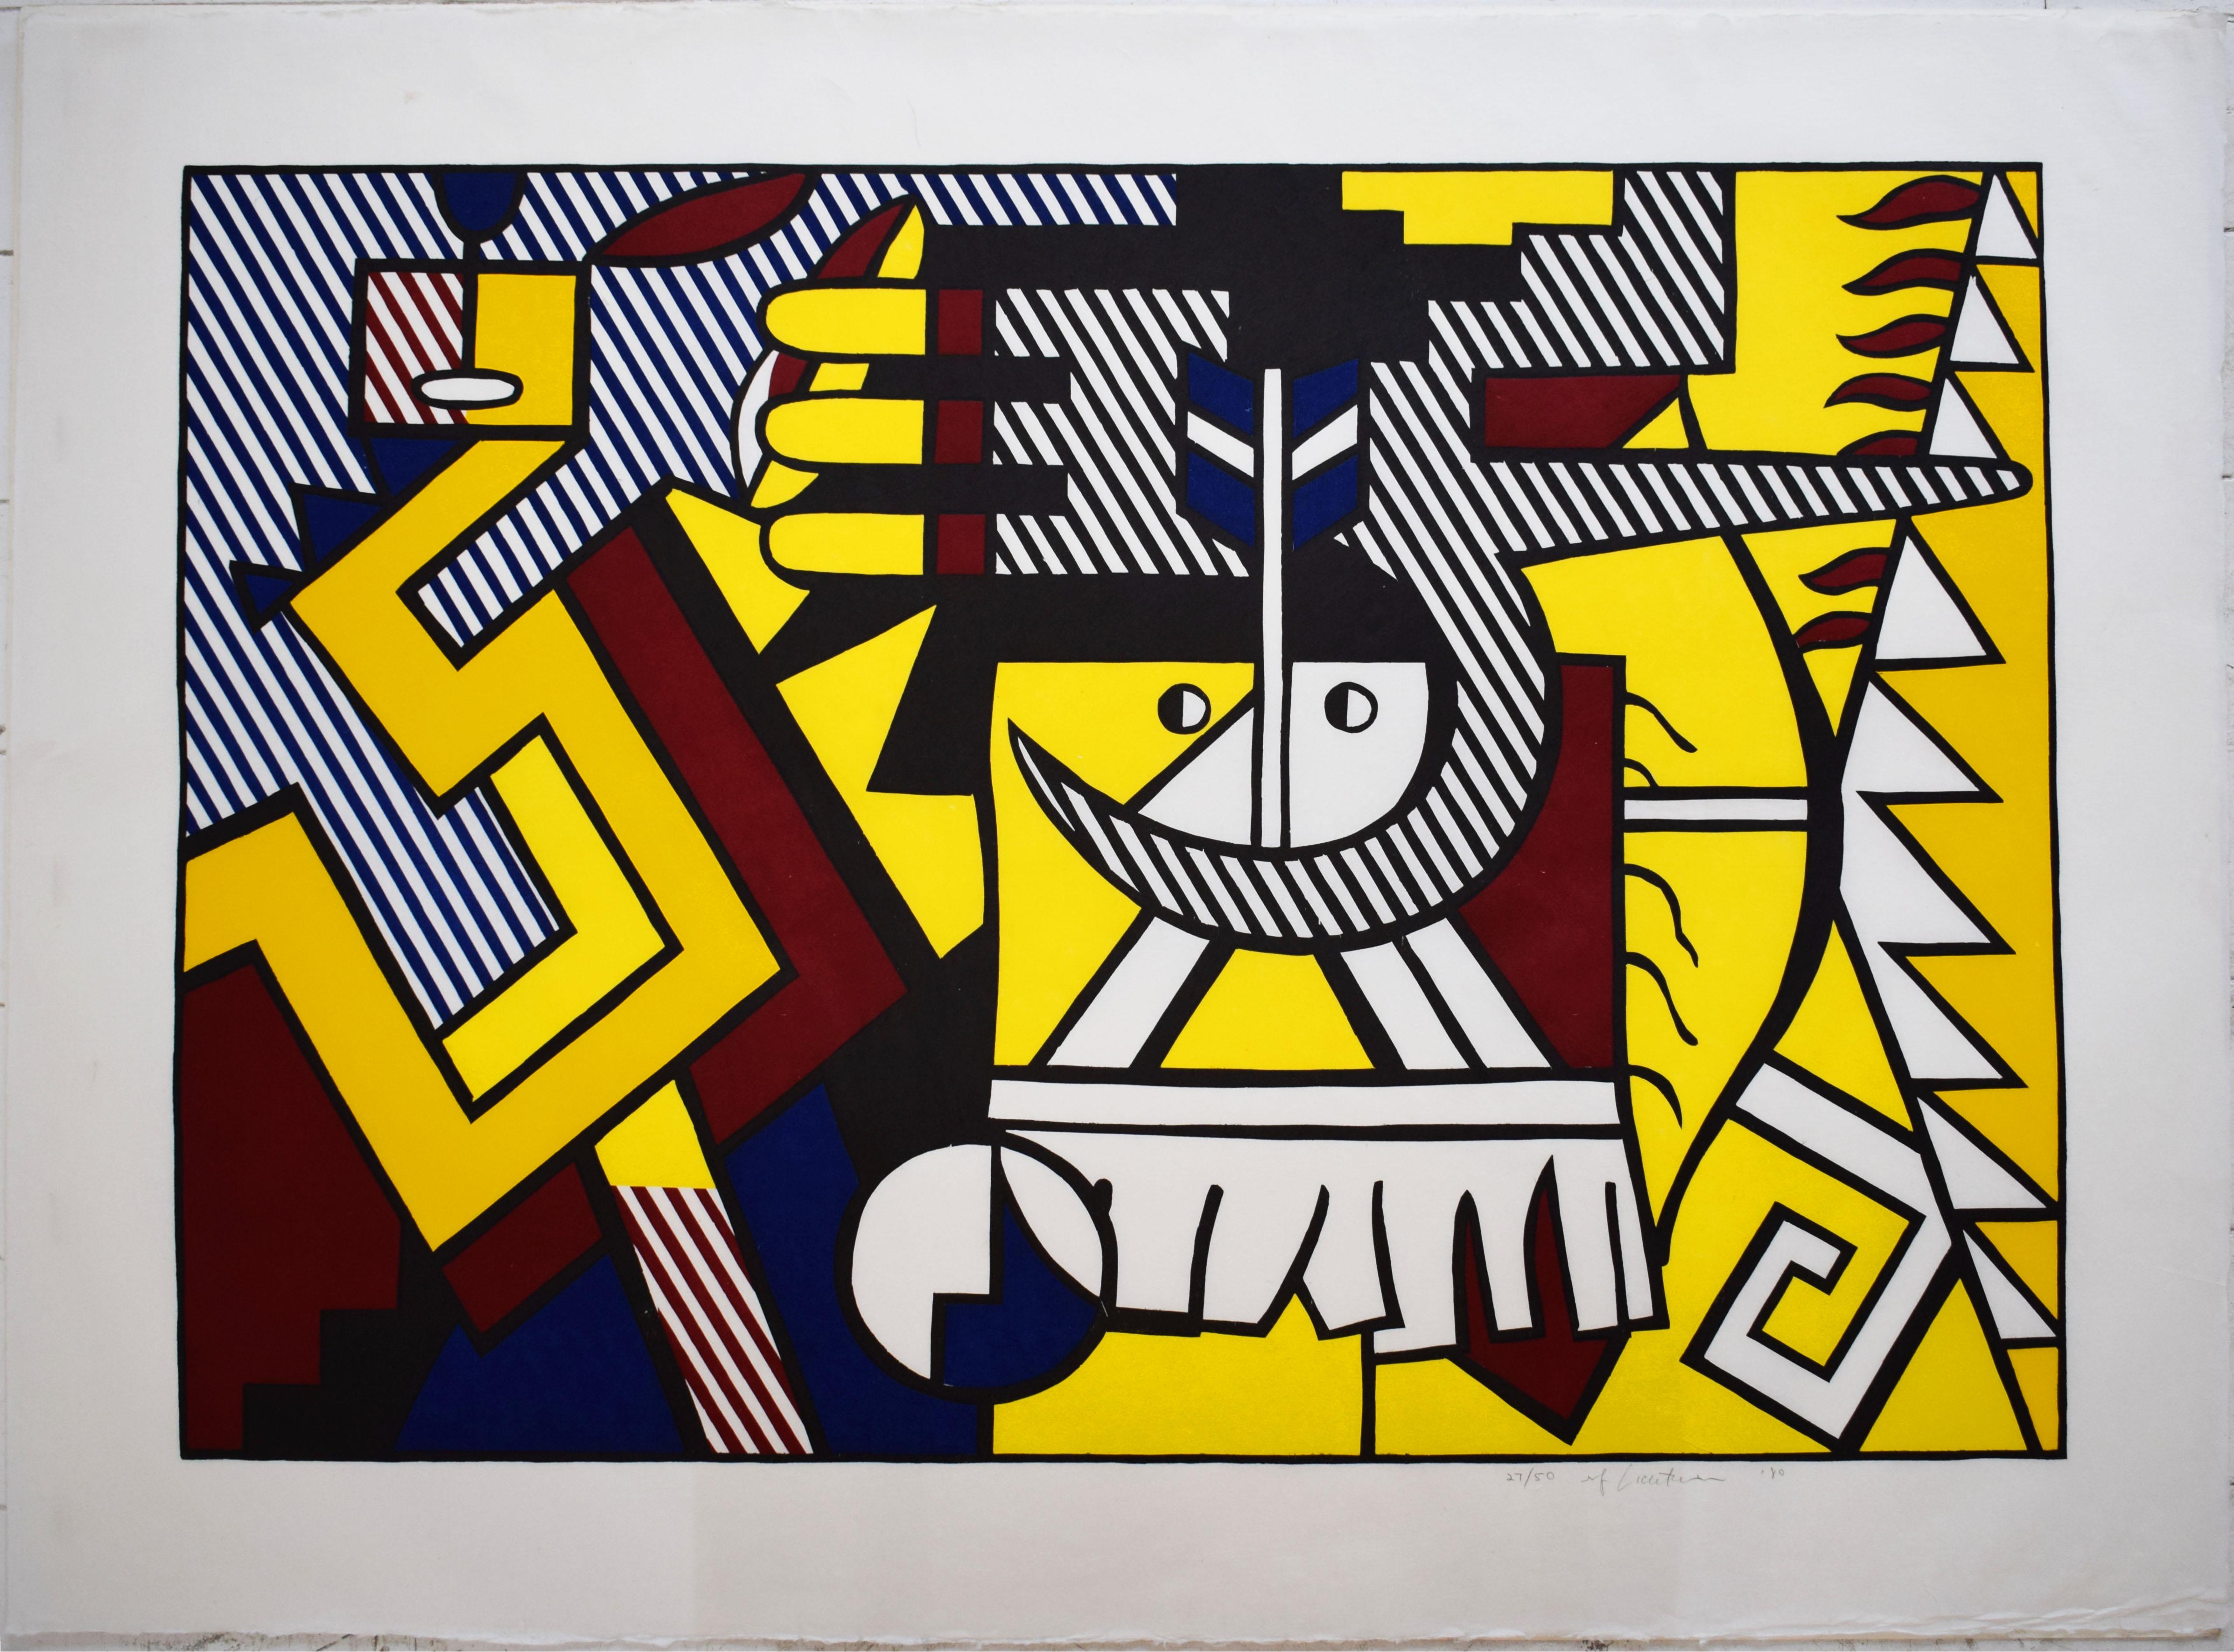 American Indian Theme VI, from: American Indian Theme -  Indigenous Pop Art  - Print by Roy Lichtenstein